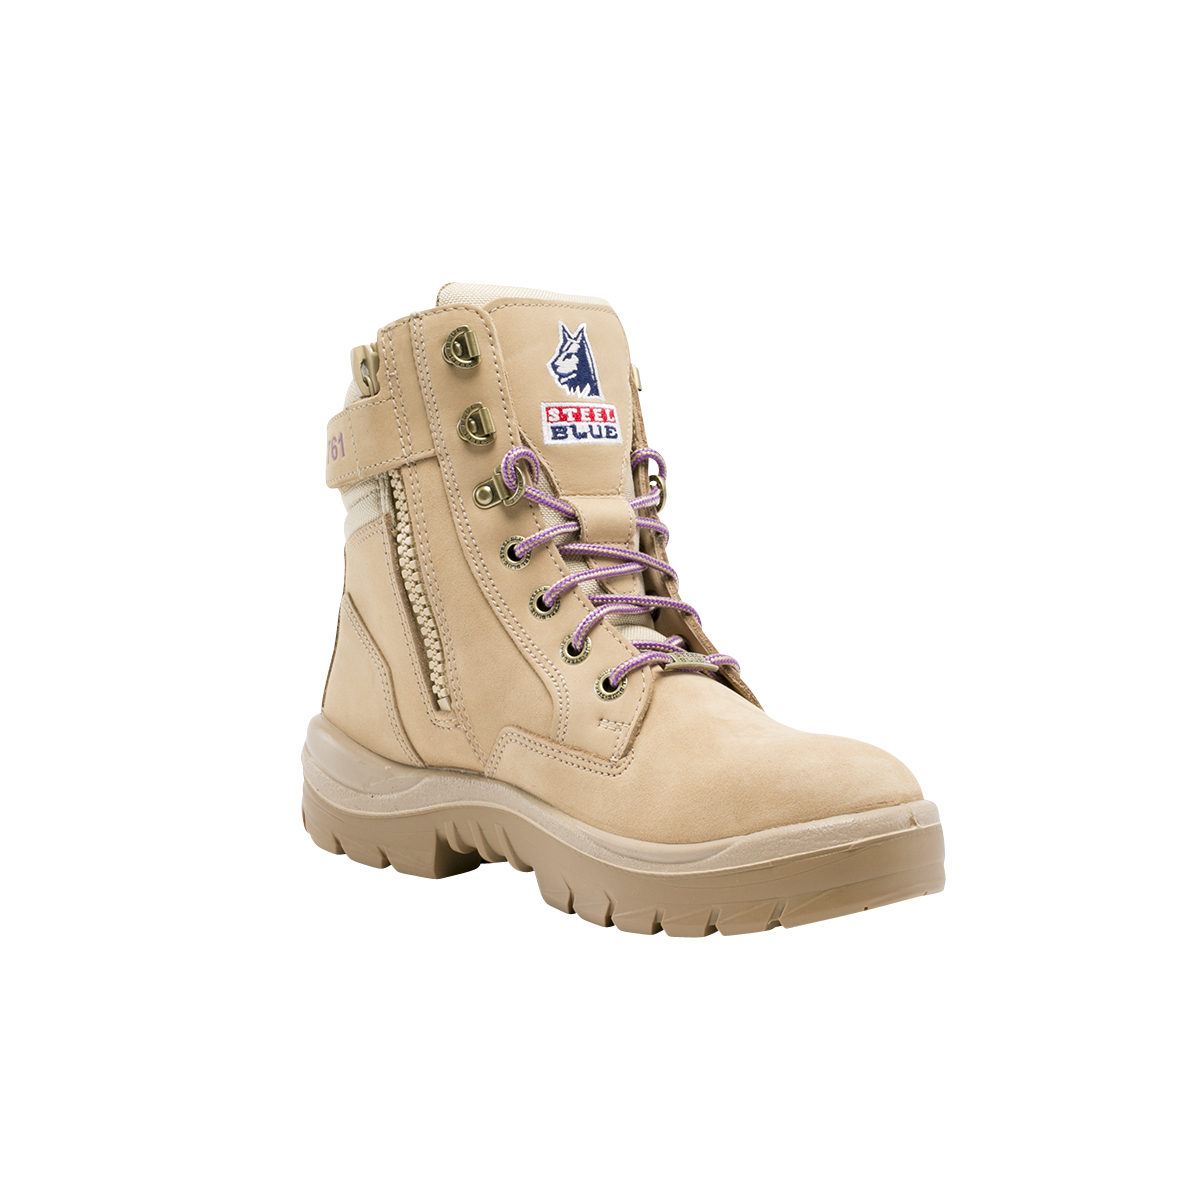 Southern Cross Ladies S3 Safety Boots